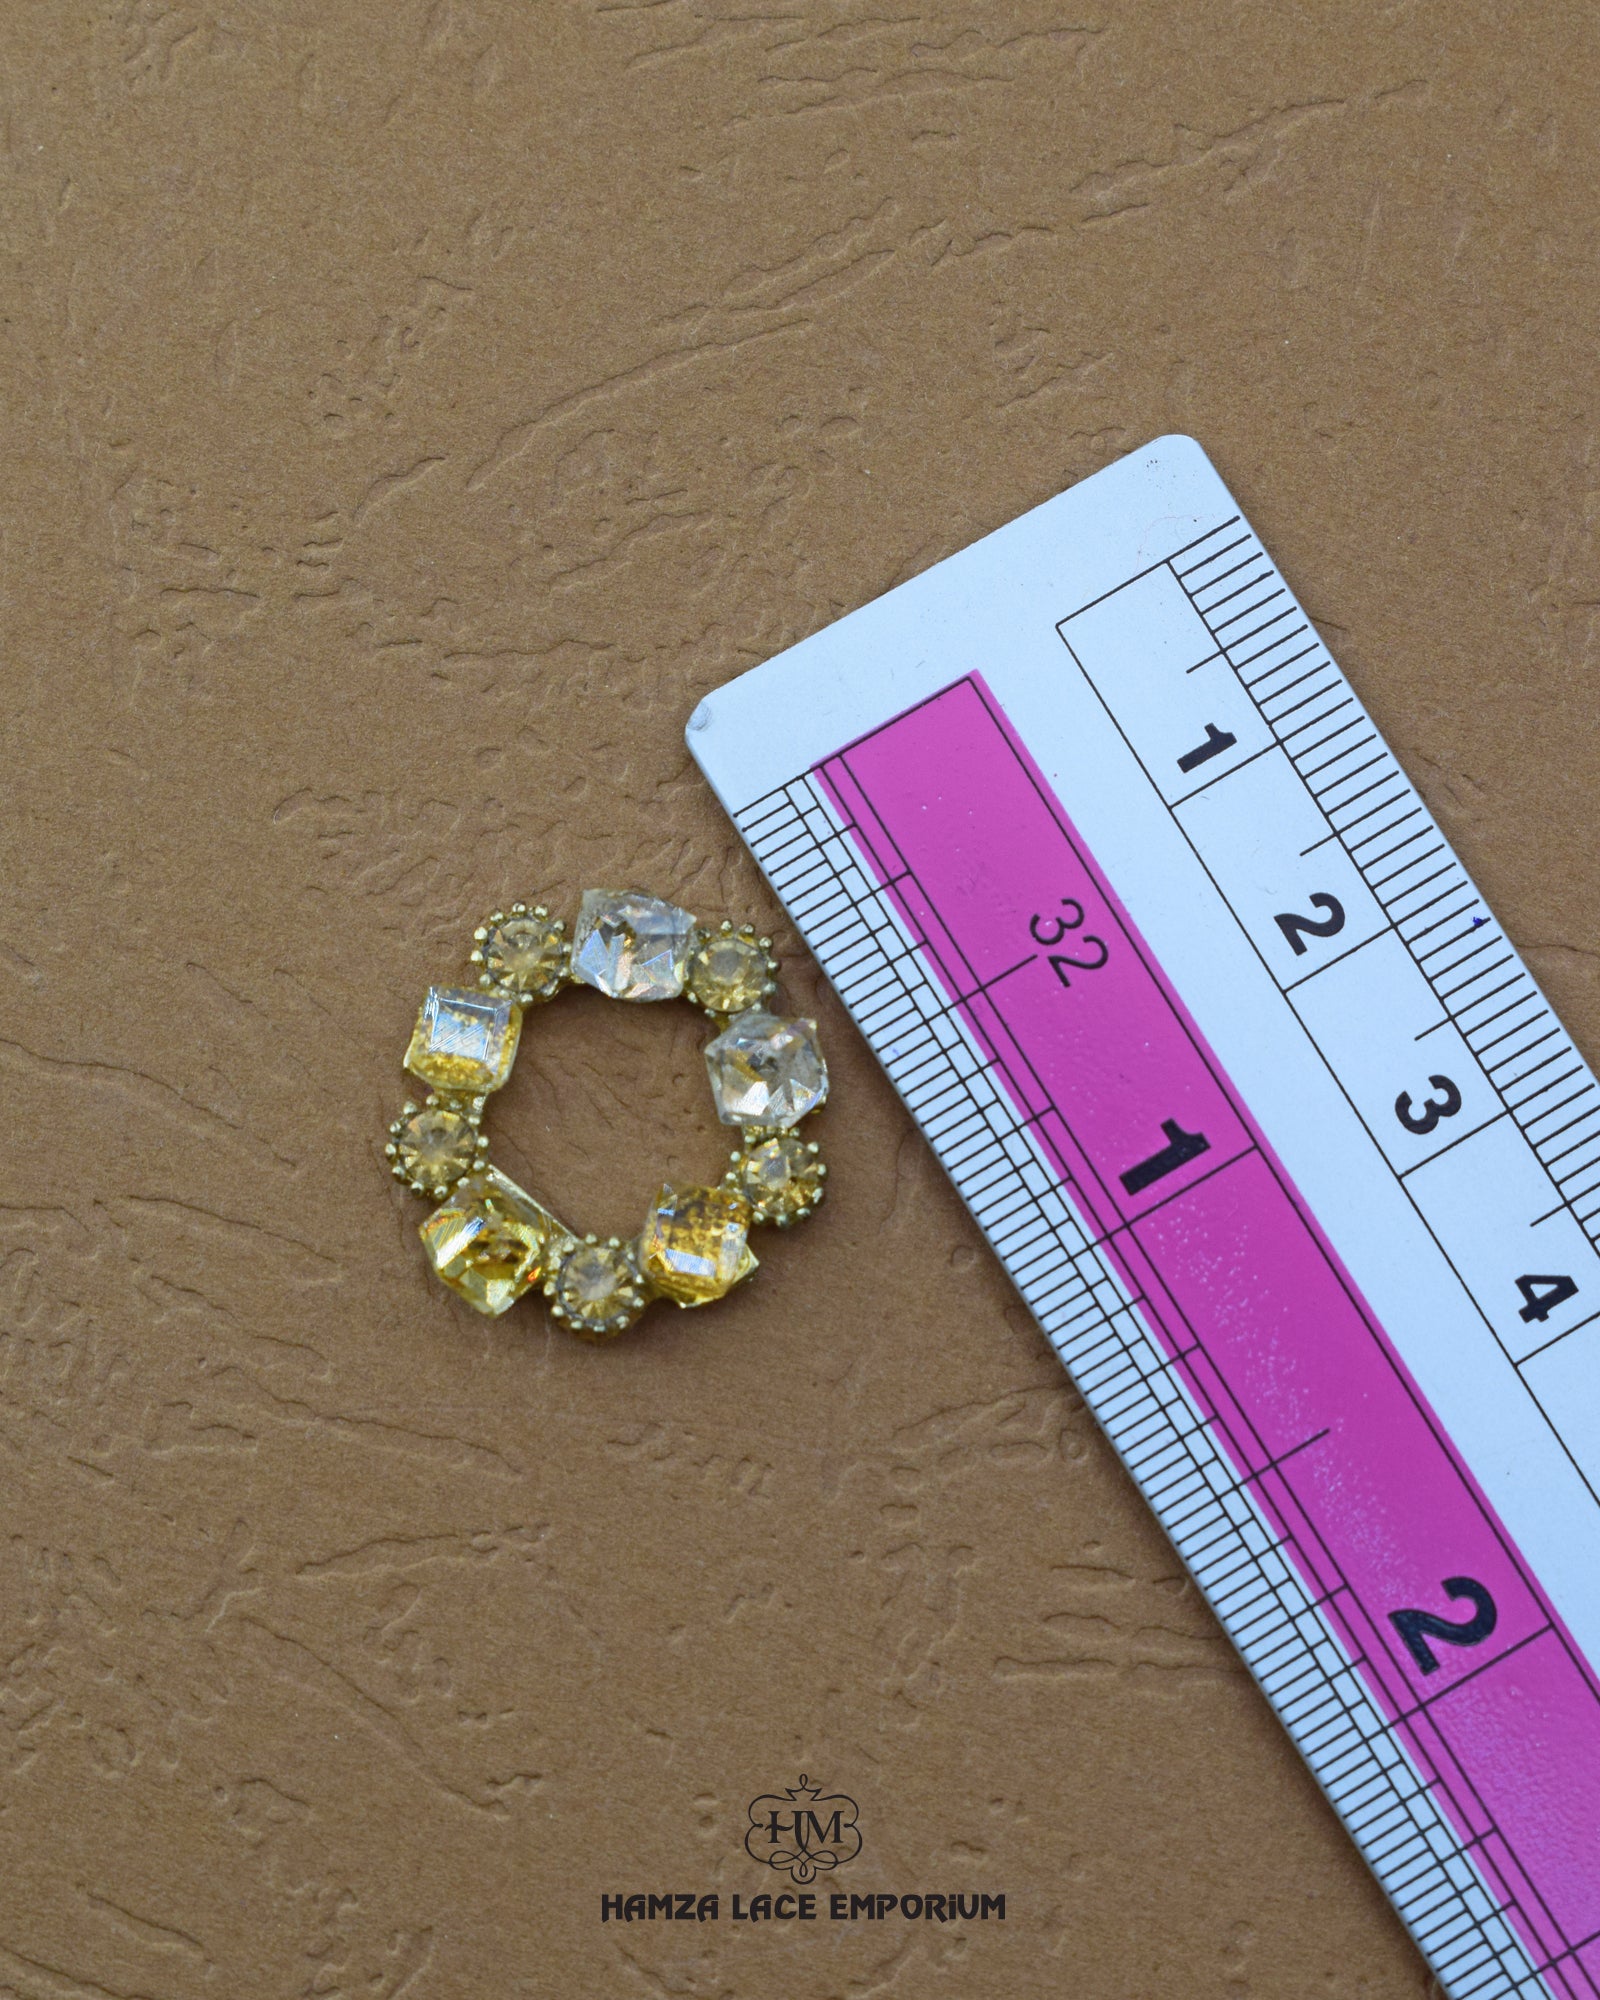 'Fancy Button FBC026' with ruler for size reference in the product image.